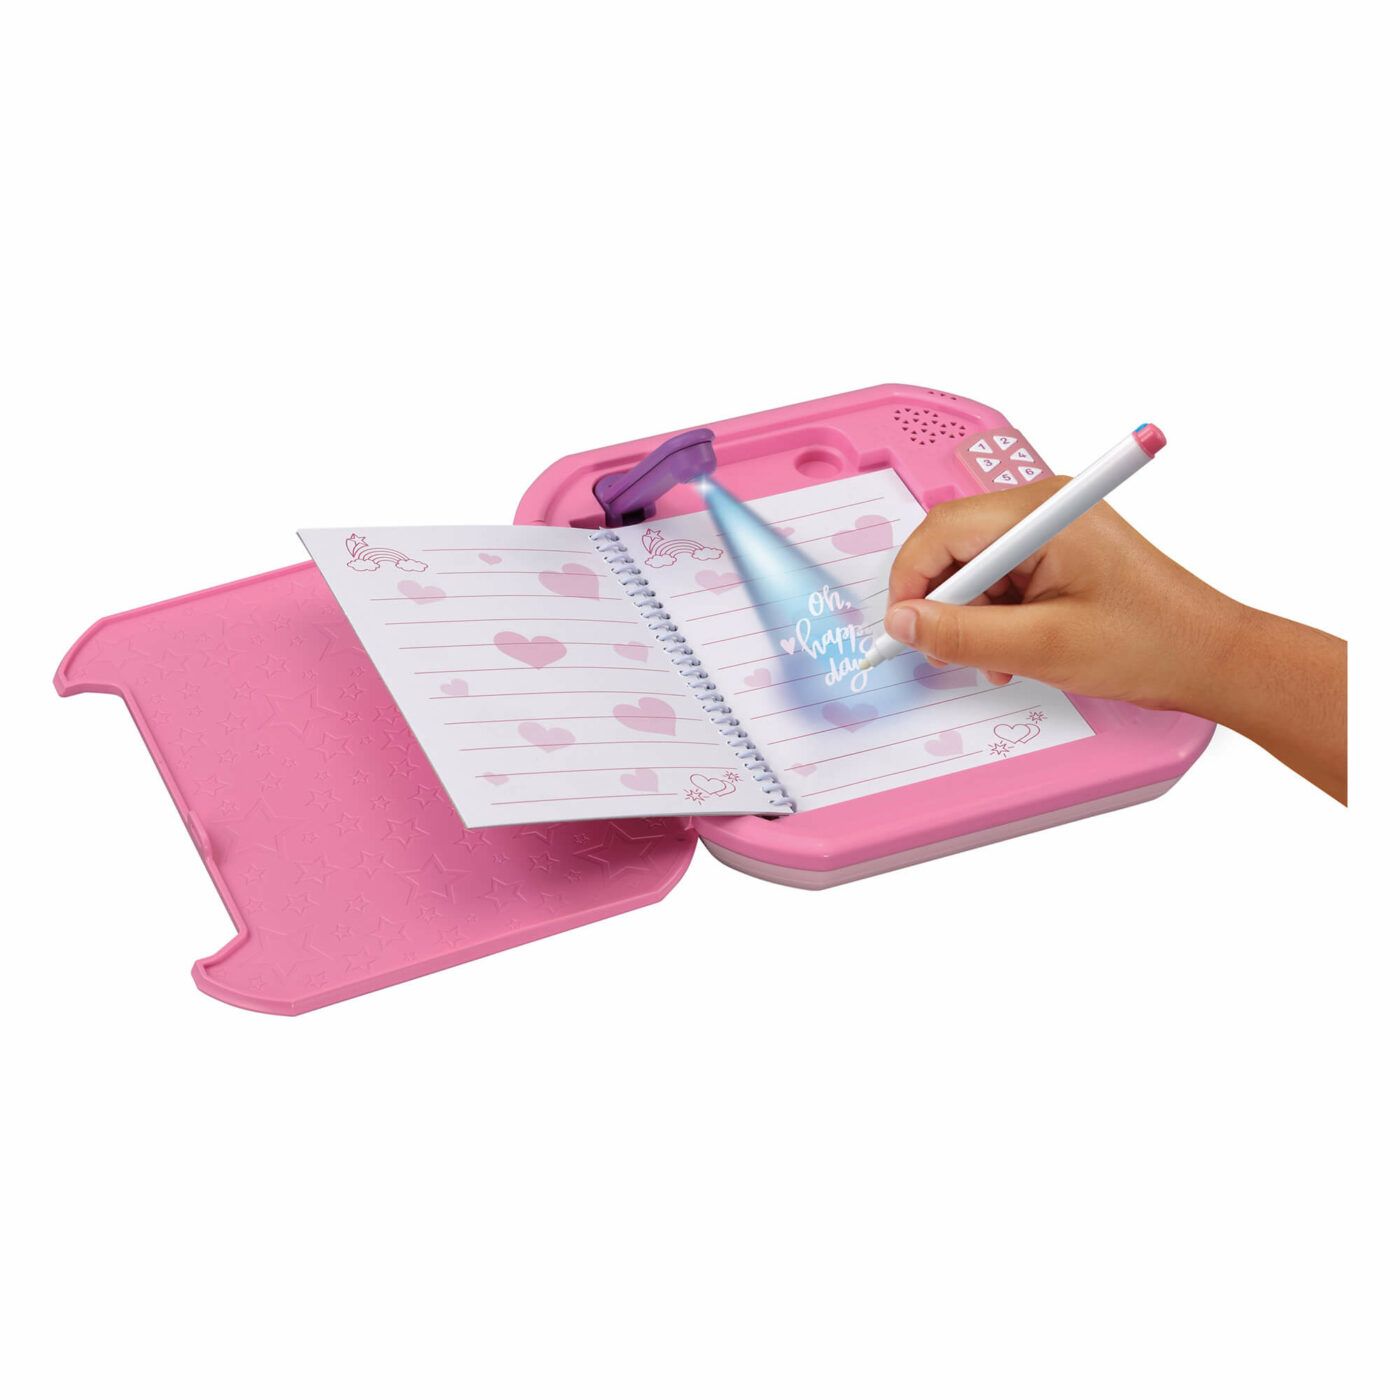 Vtech Secret Safe - Magic Notebook with Invisible Ink Pen5